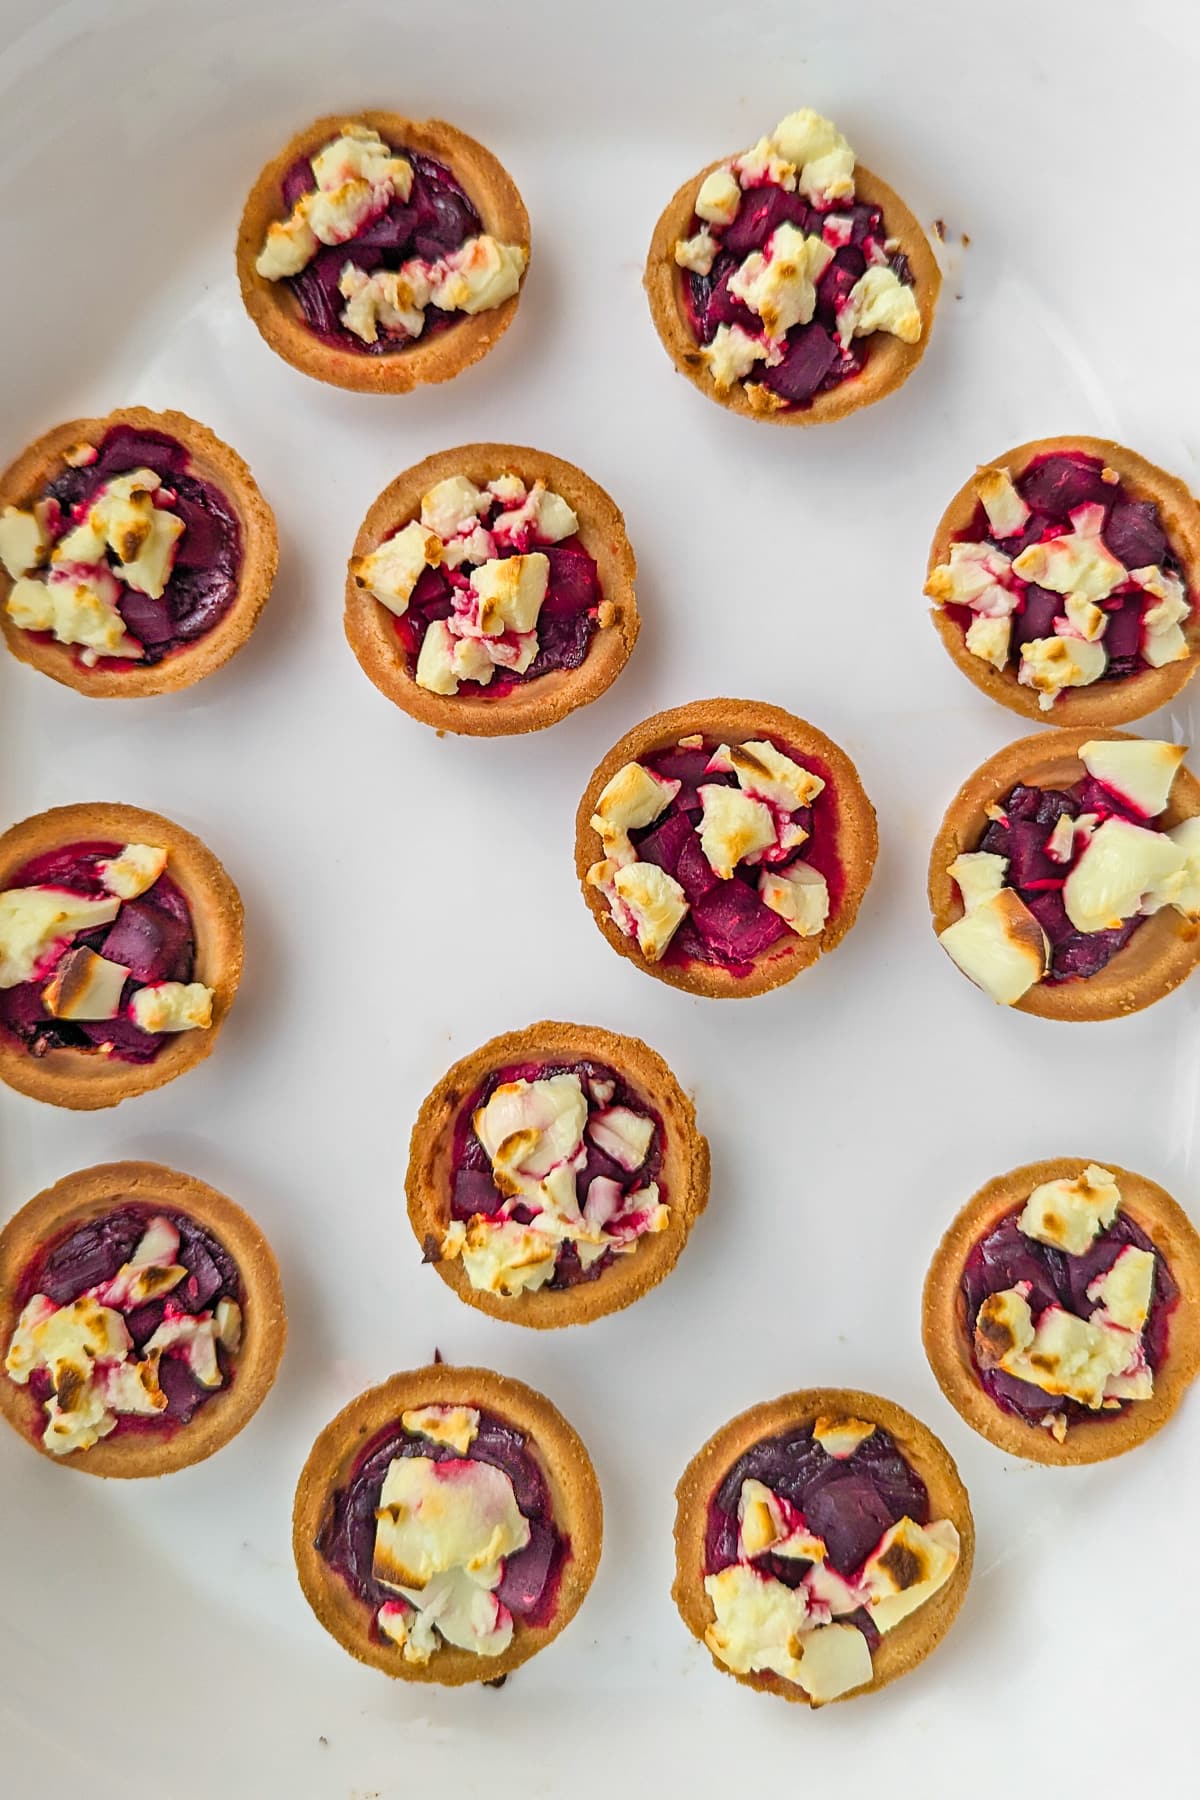 White traybake with beetroot and feta tartlets and caramelized onions.